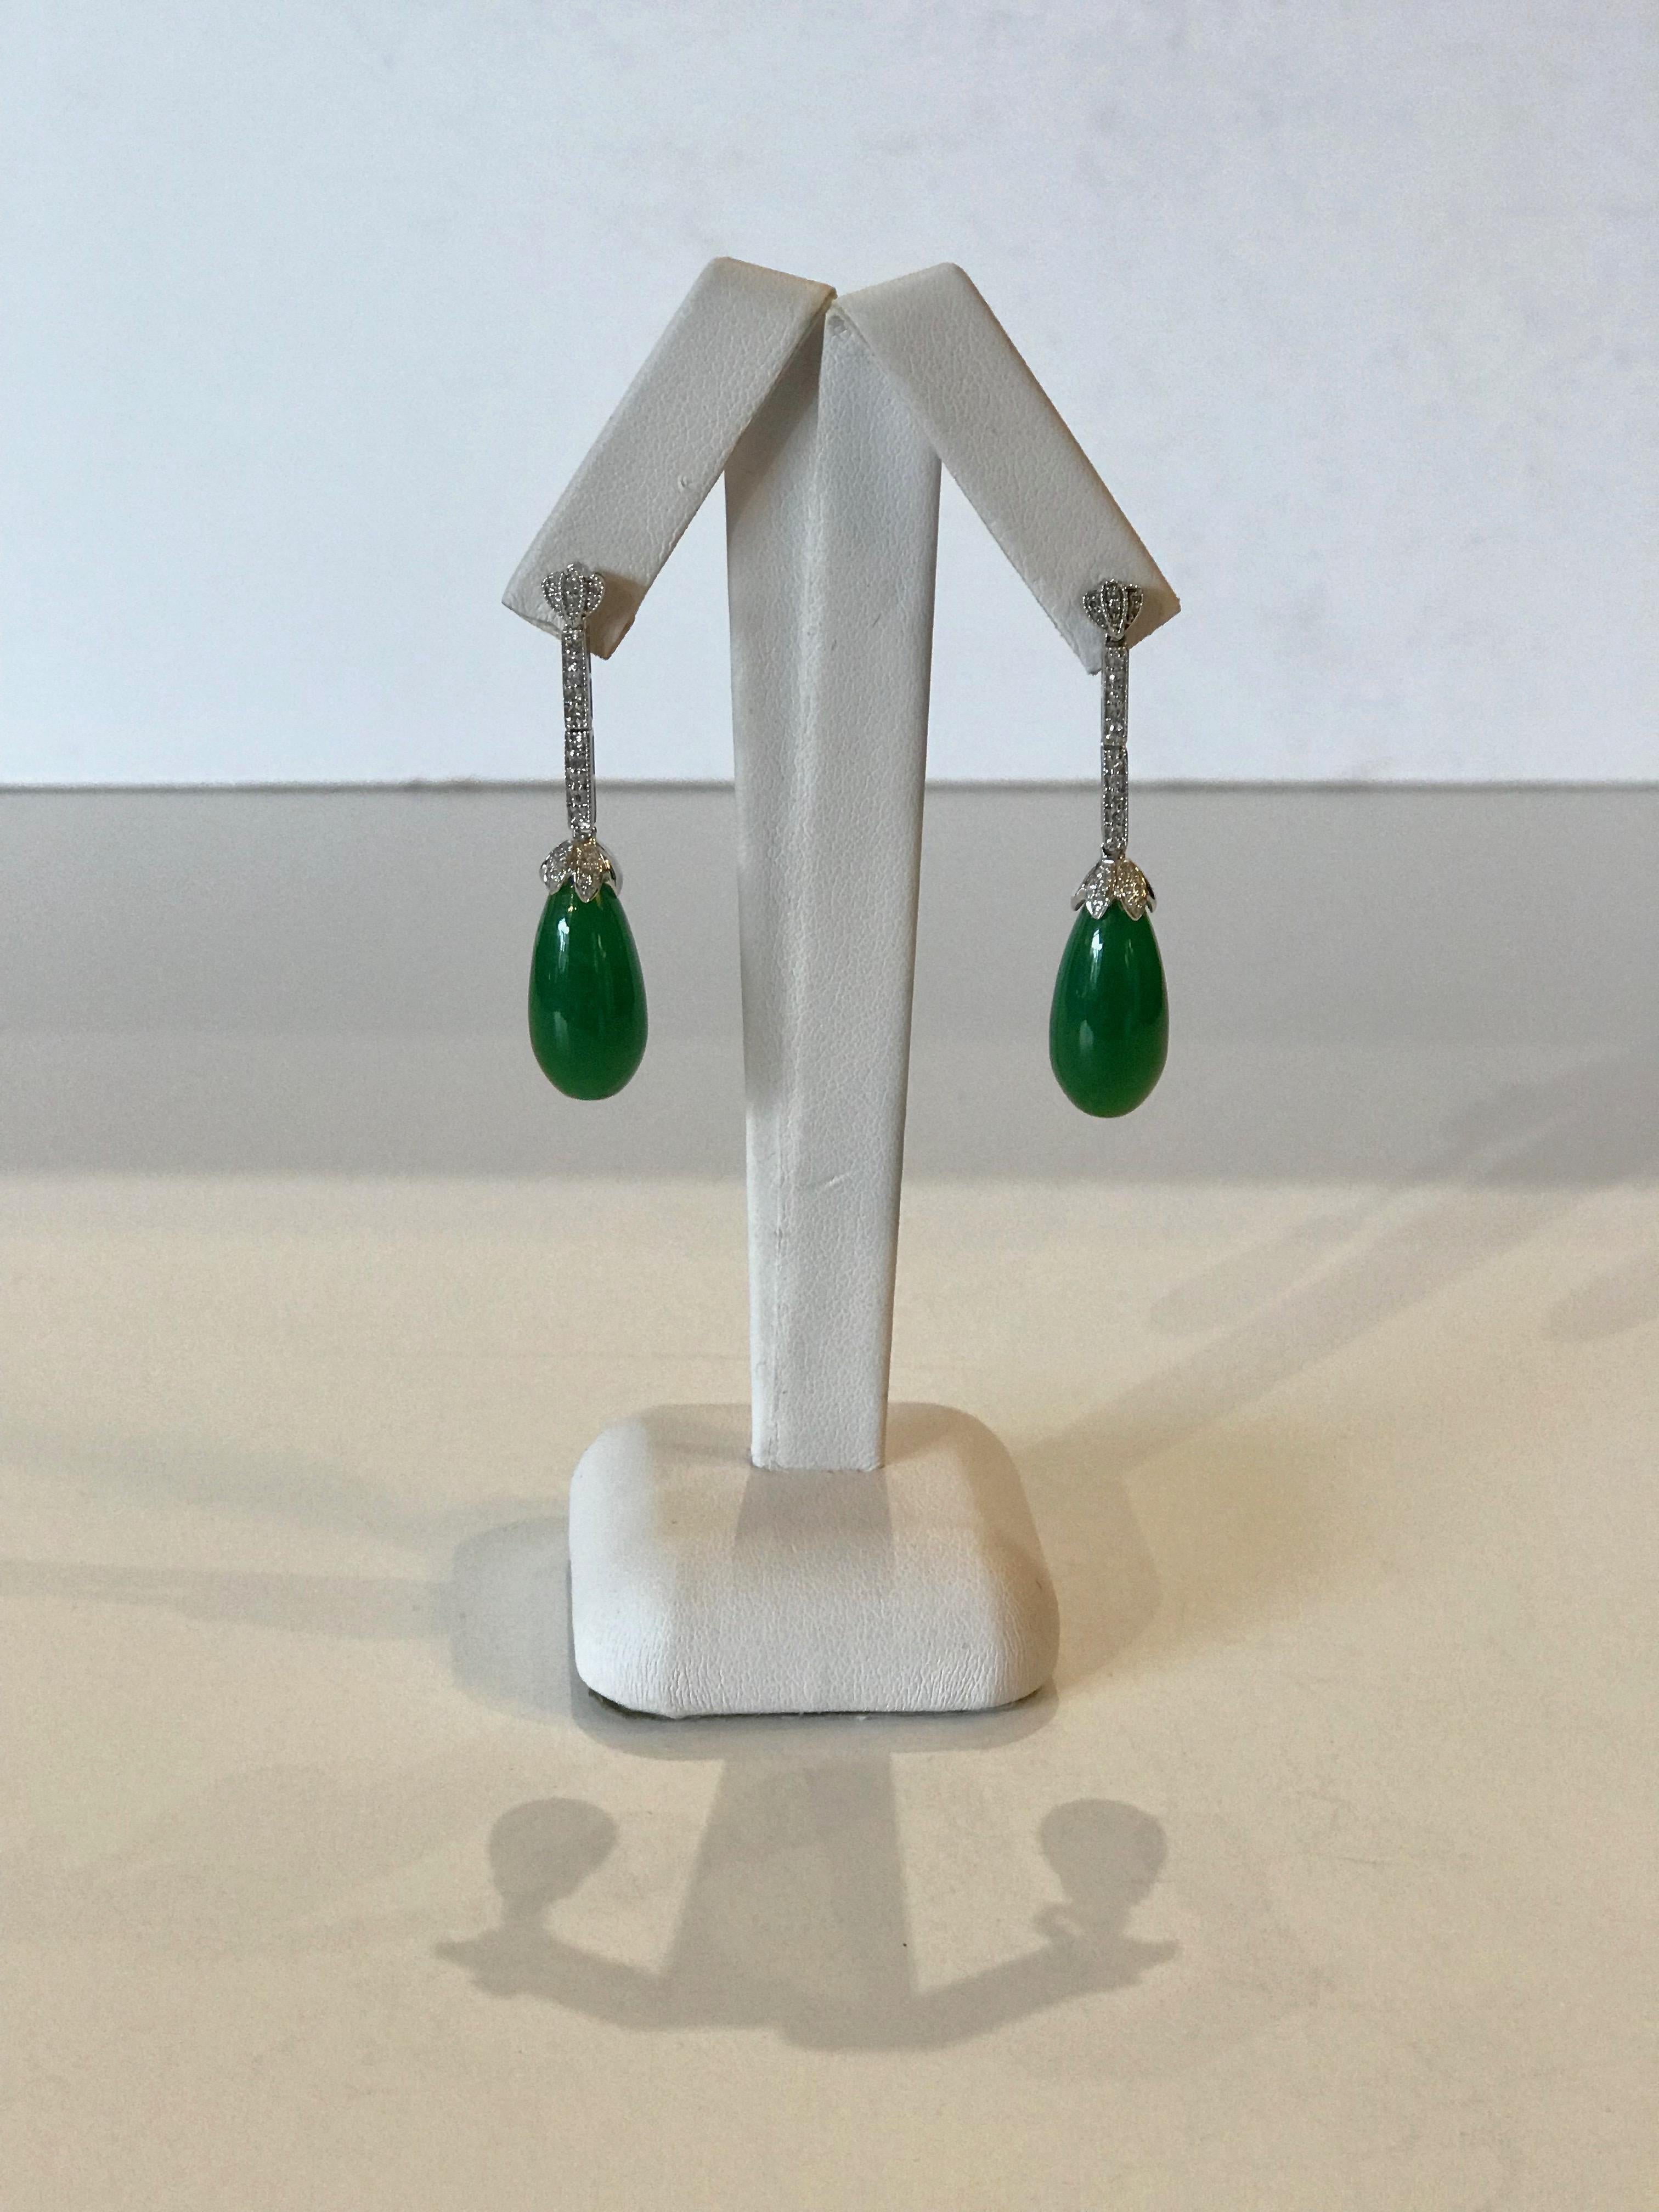 A pair of Gold Diamond and Jadeite drop earrings held by a post, secured by a butterfly clasp. The fan-shaped top mount is set with 6 small round cut diamonds, 12 in total. Vertical galleried settings in white gold are micro set with diamonds, total